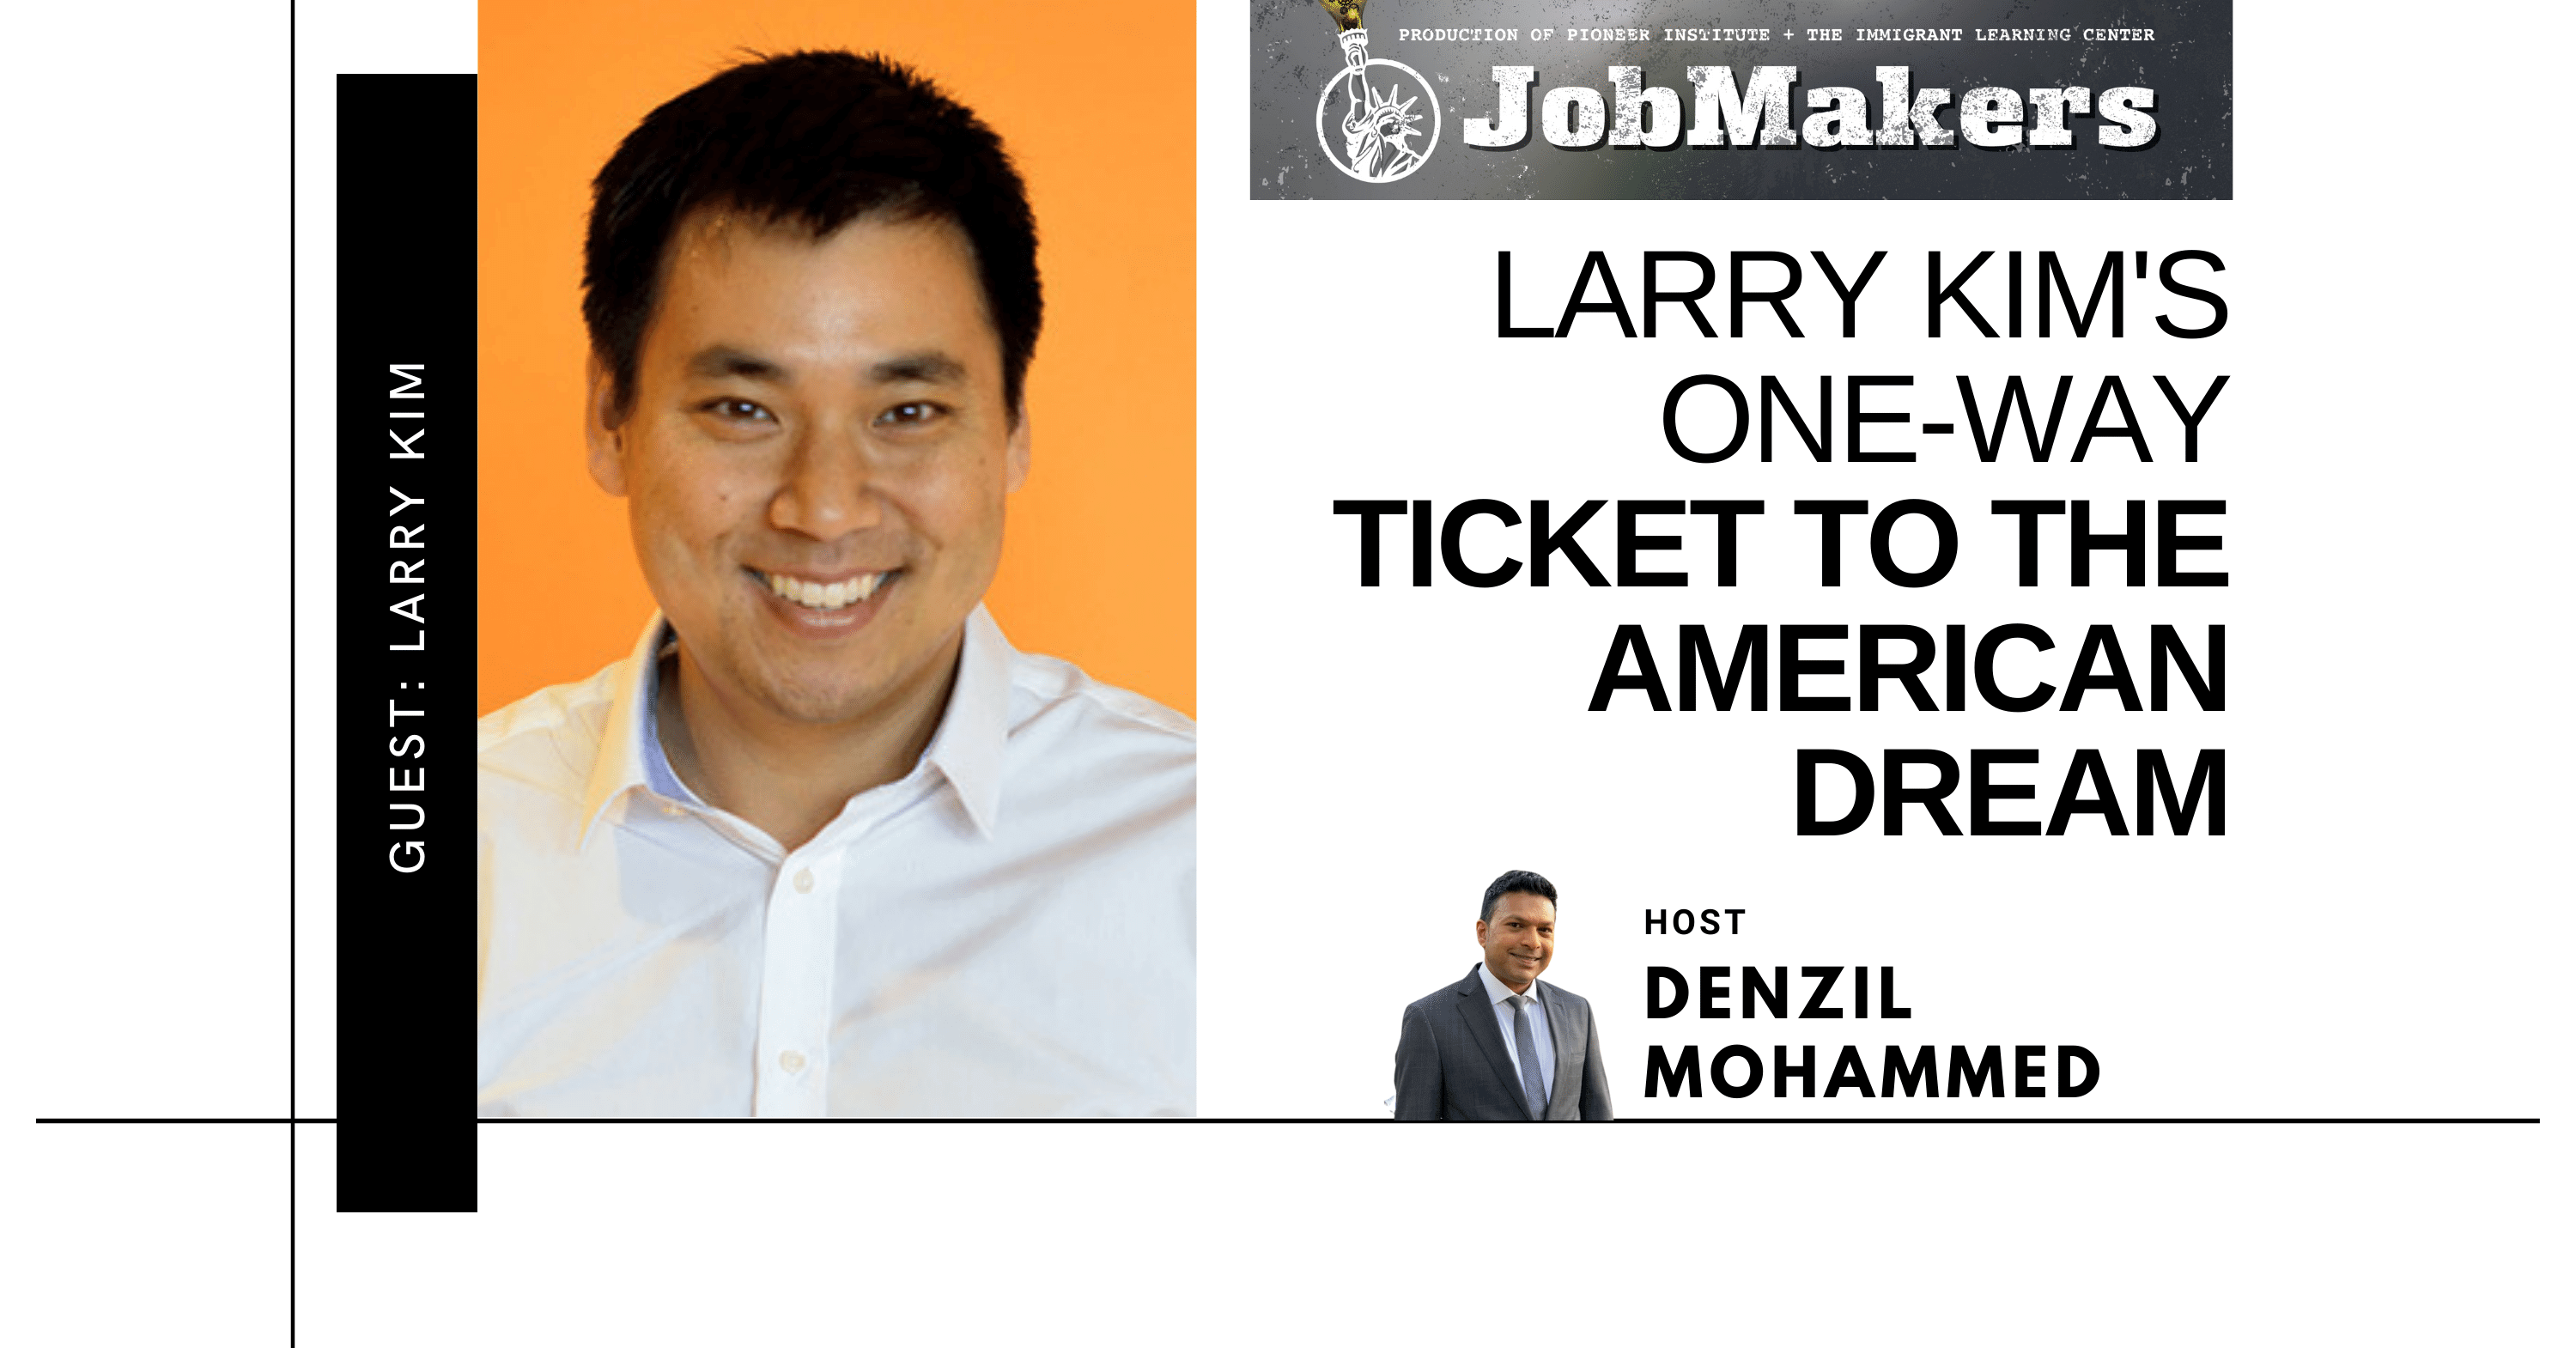 Larry Kim’s One-Way Ticket to the American Dream